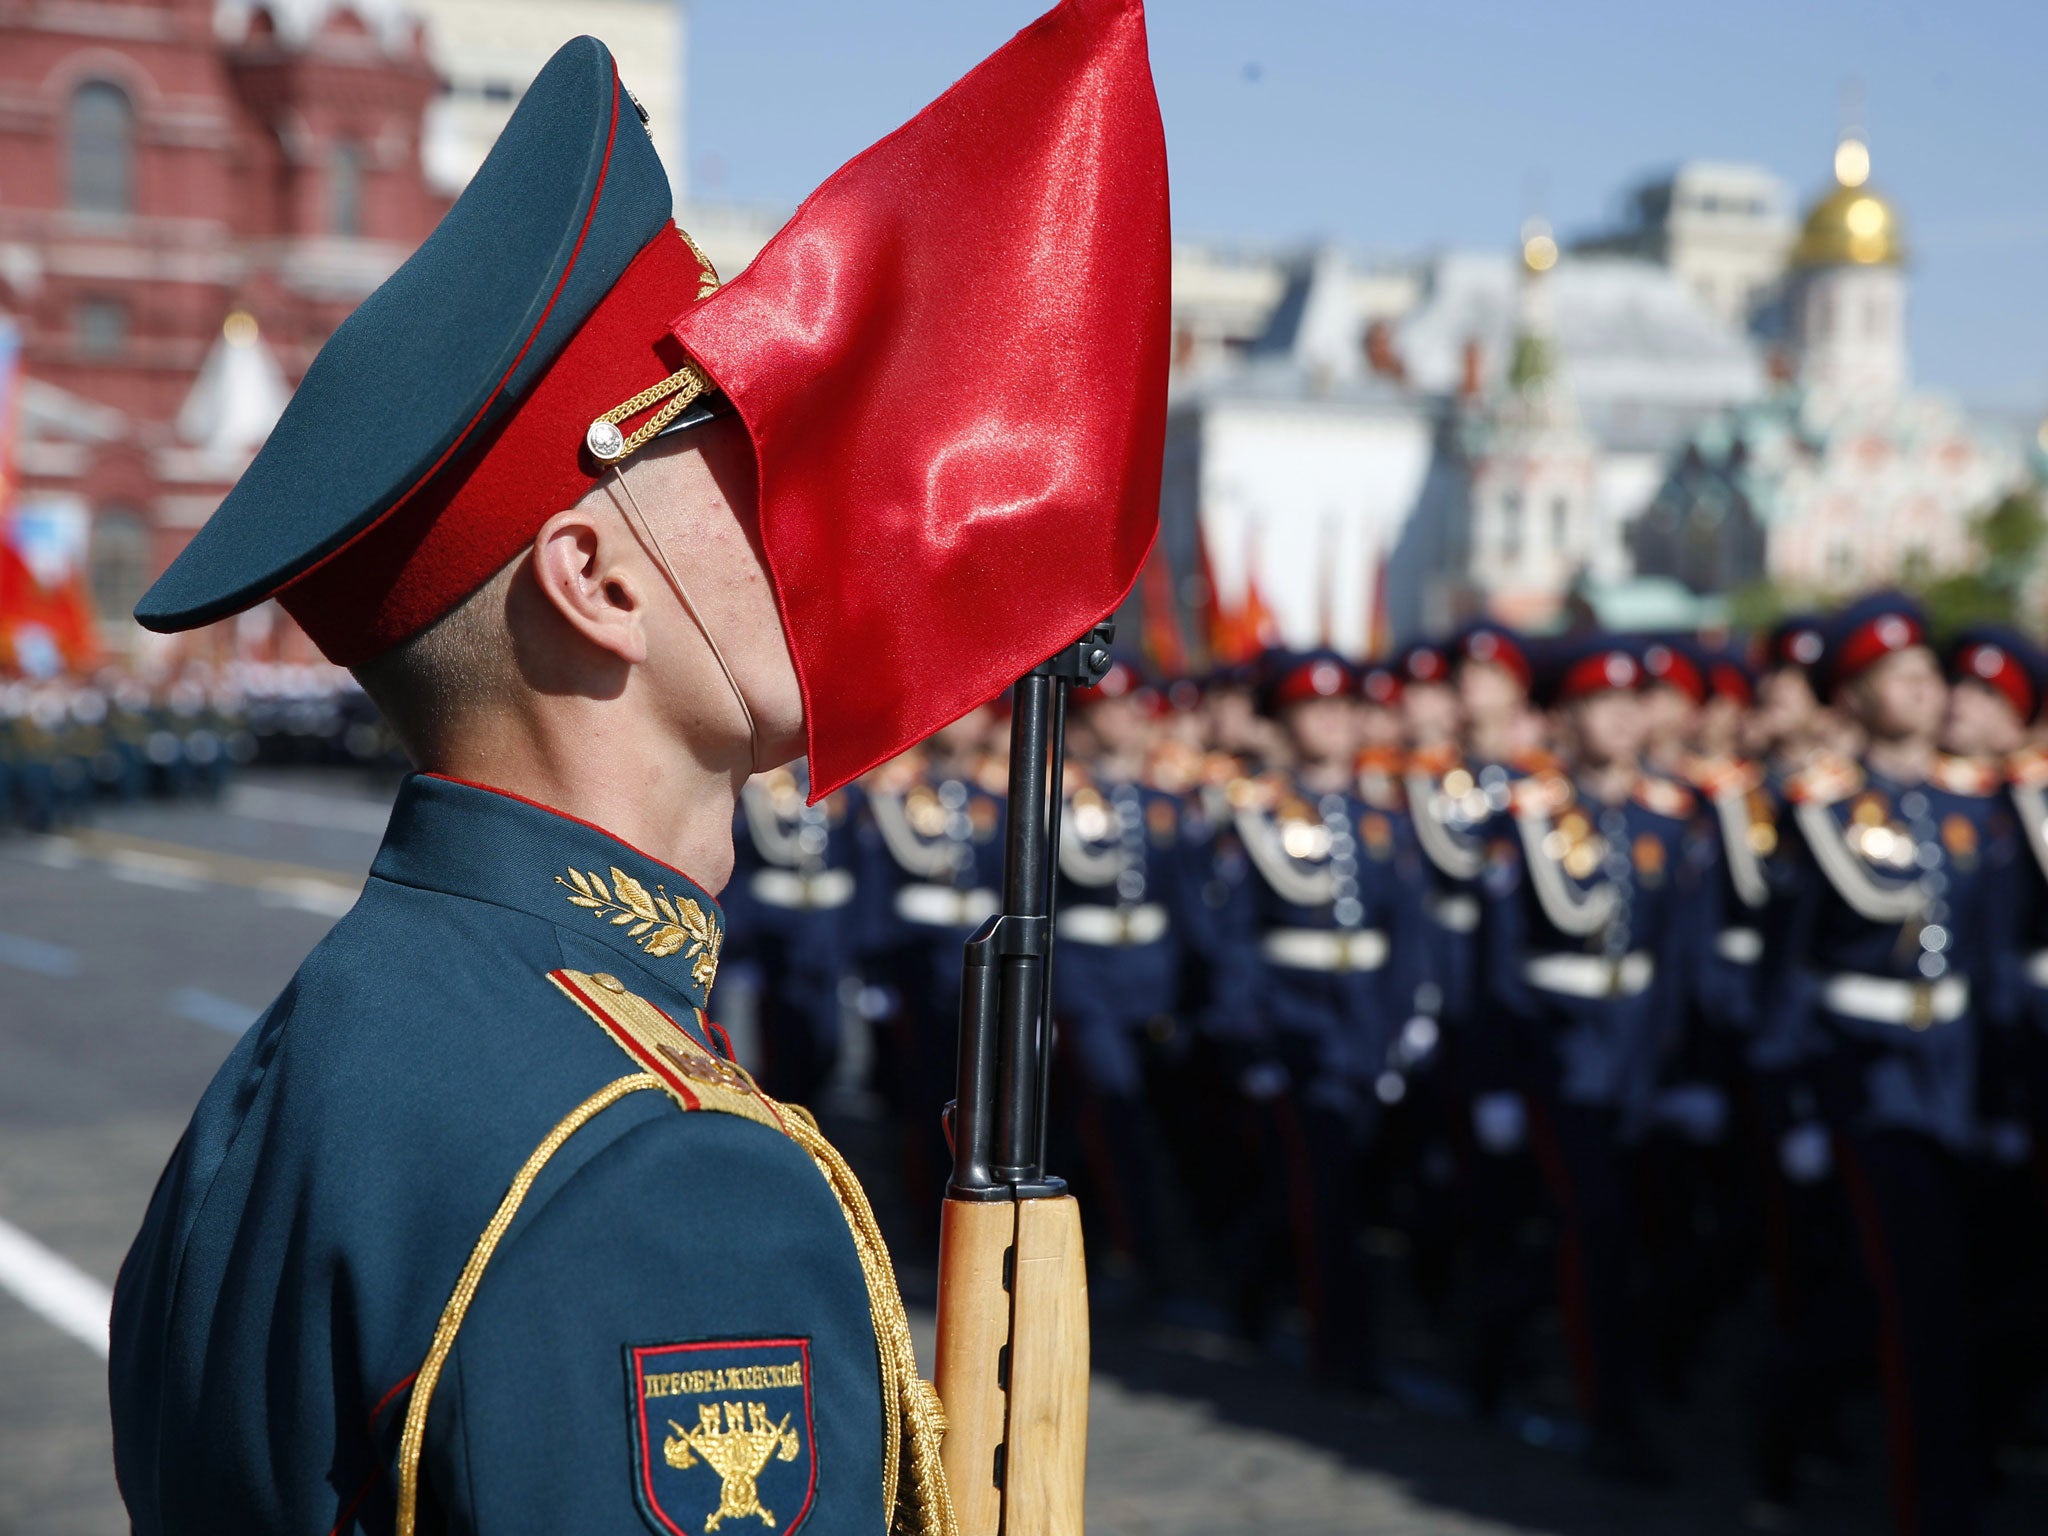 Russian troops march during a Victory Day parade, which commemorates the 1945 defeat of Nazi Germany, at Red Square in Moscow